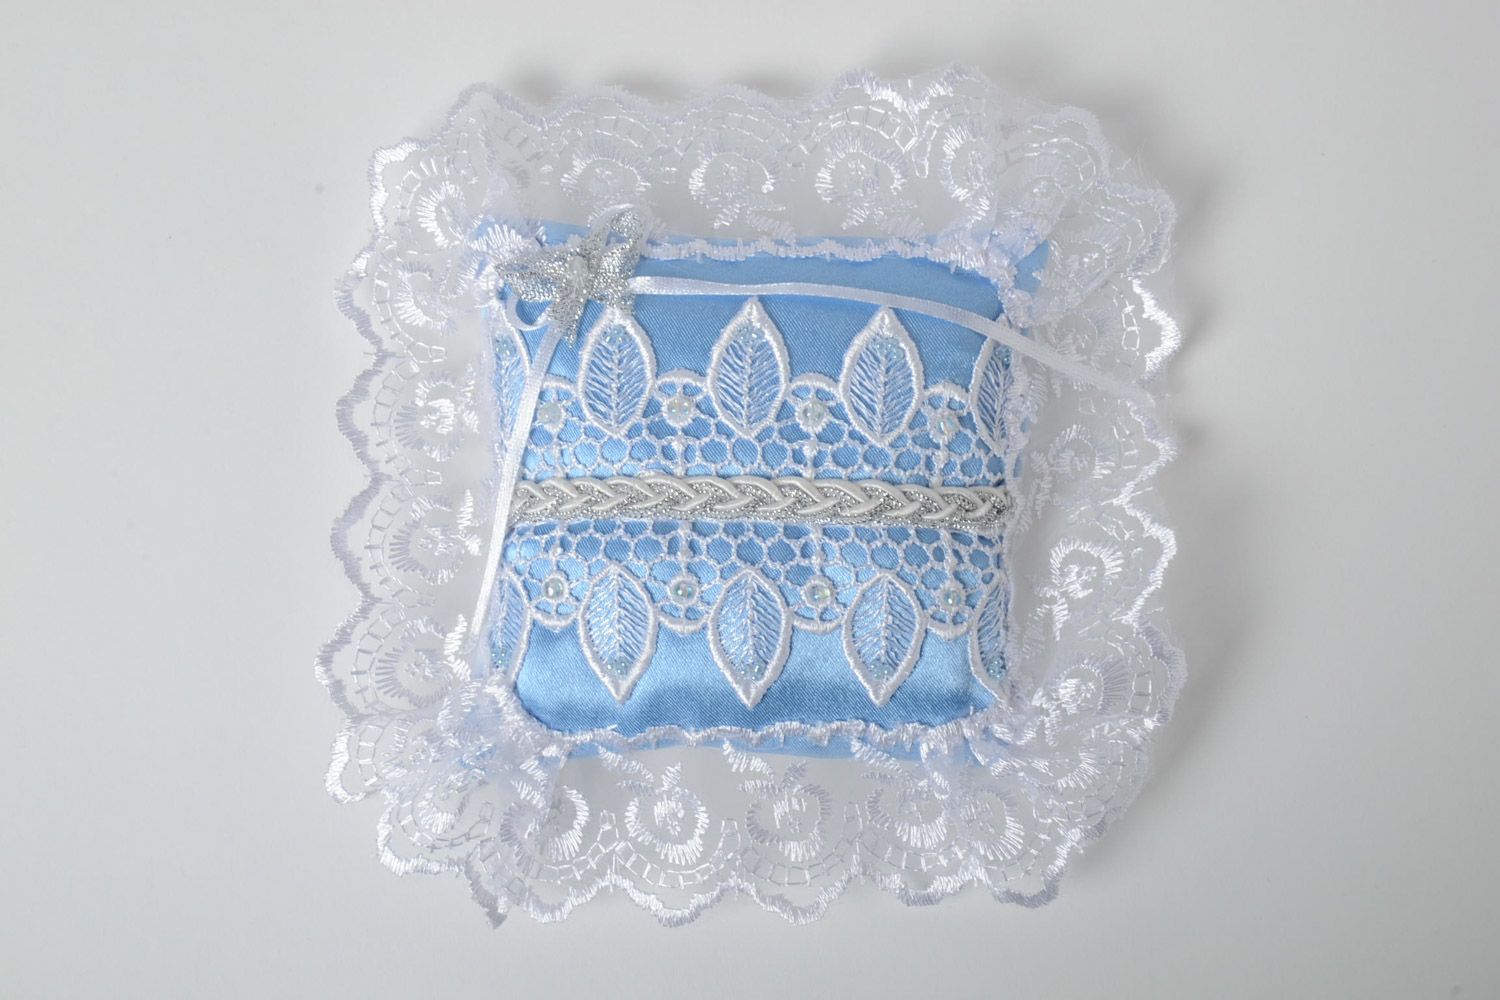 Handmade wedding rings pillow sewn of blue satin with white lace and Czech beads photo 2